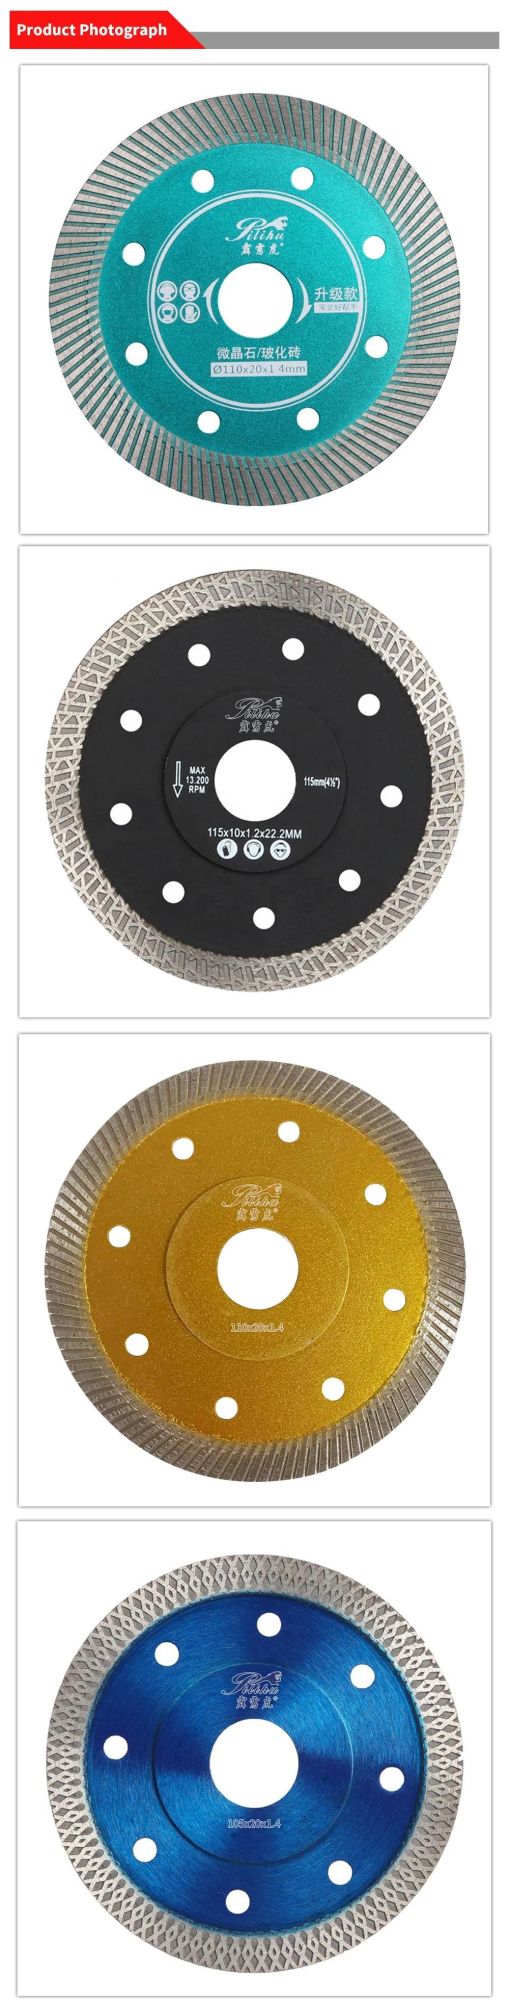 4′ ′ Granite Cutting Disc Turbo Diamond Saw Blades for Construction Tools